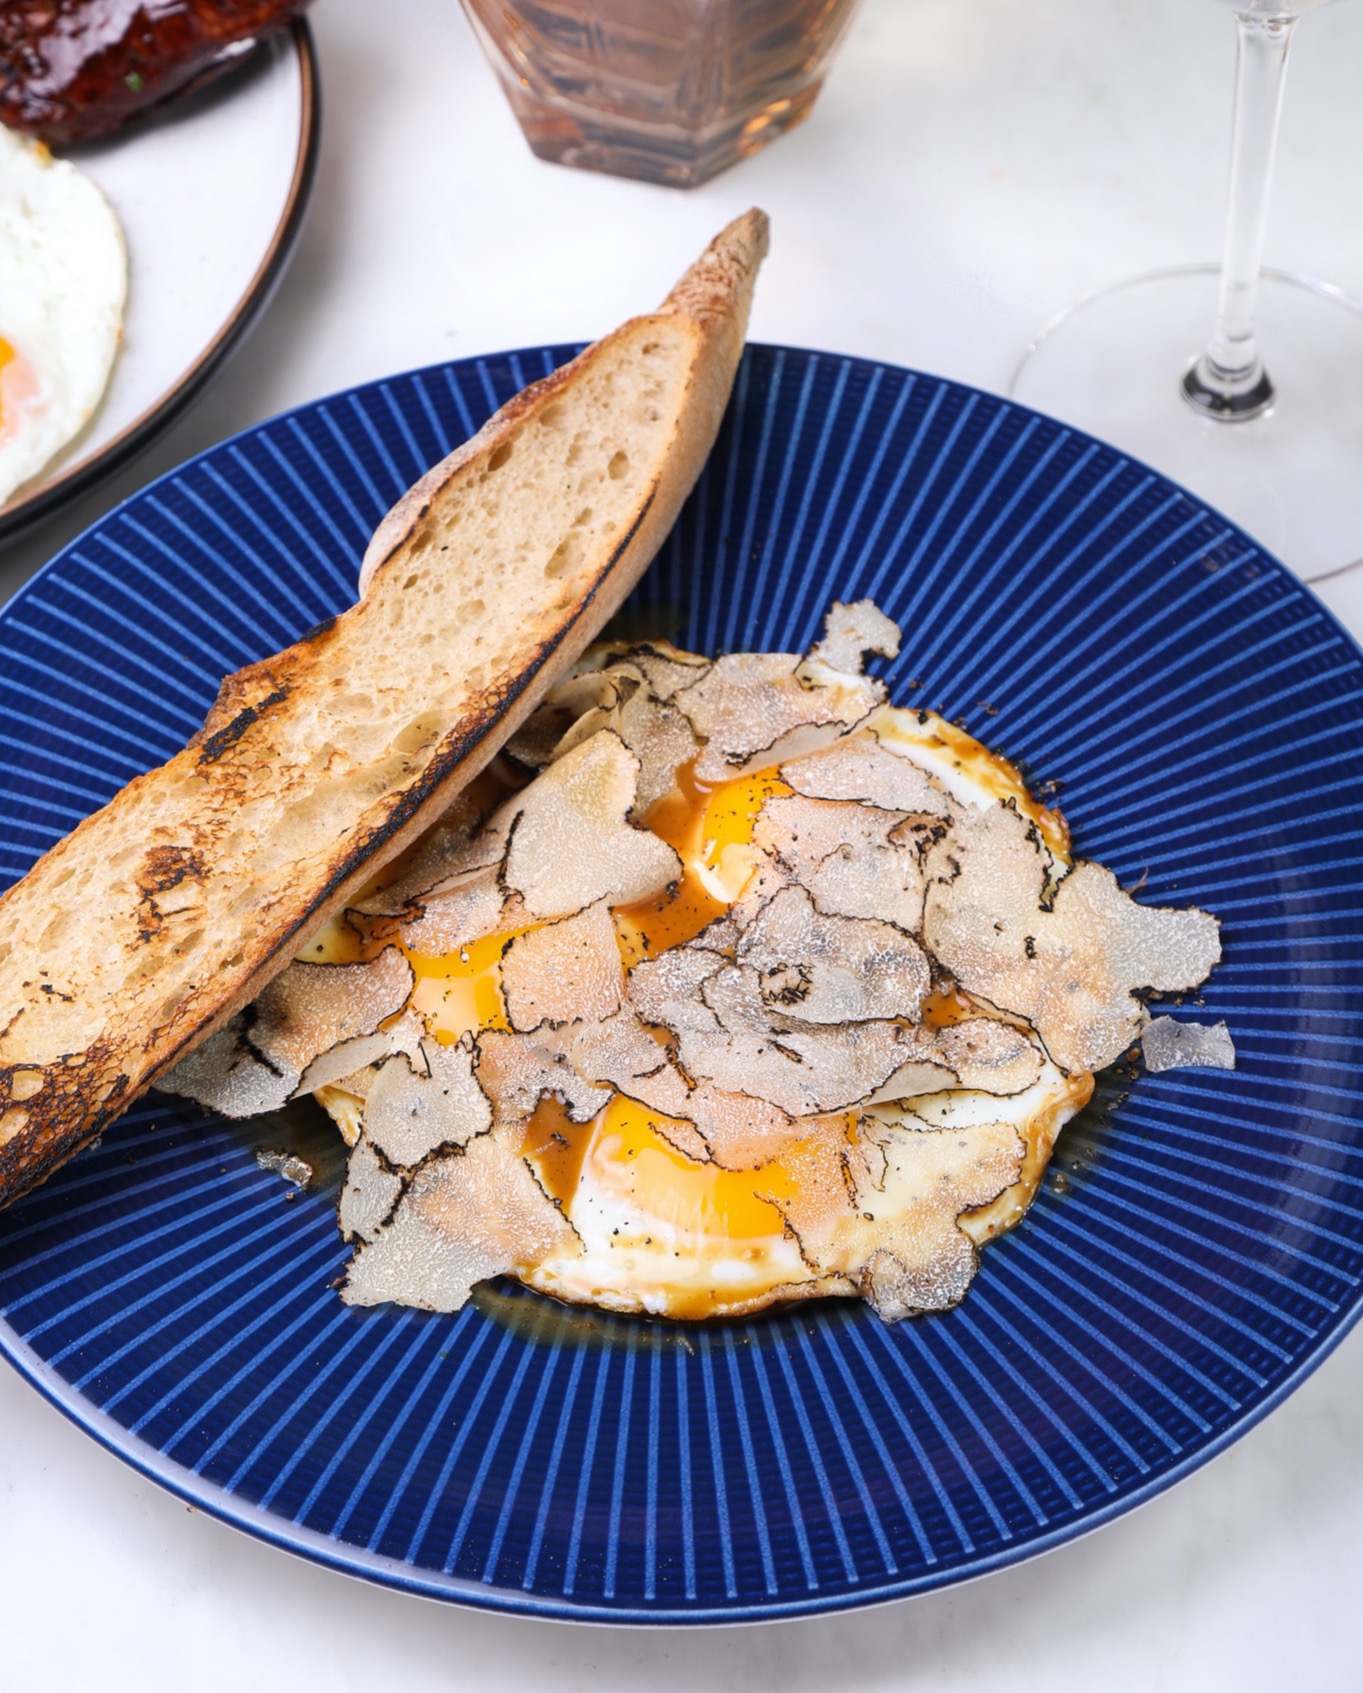 A blue plate with eggs and a side of bread